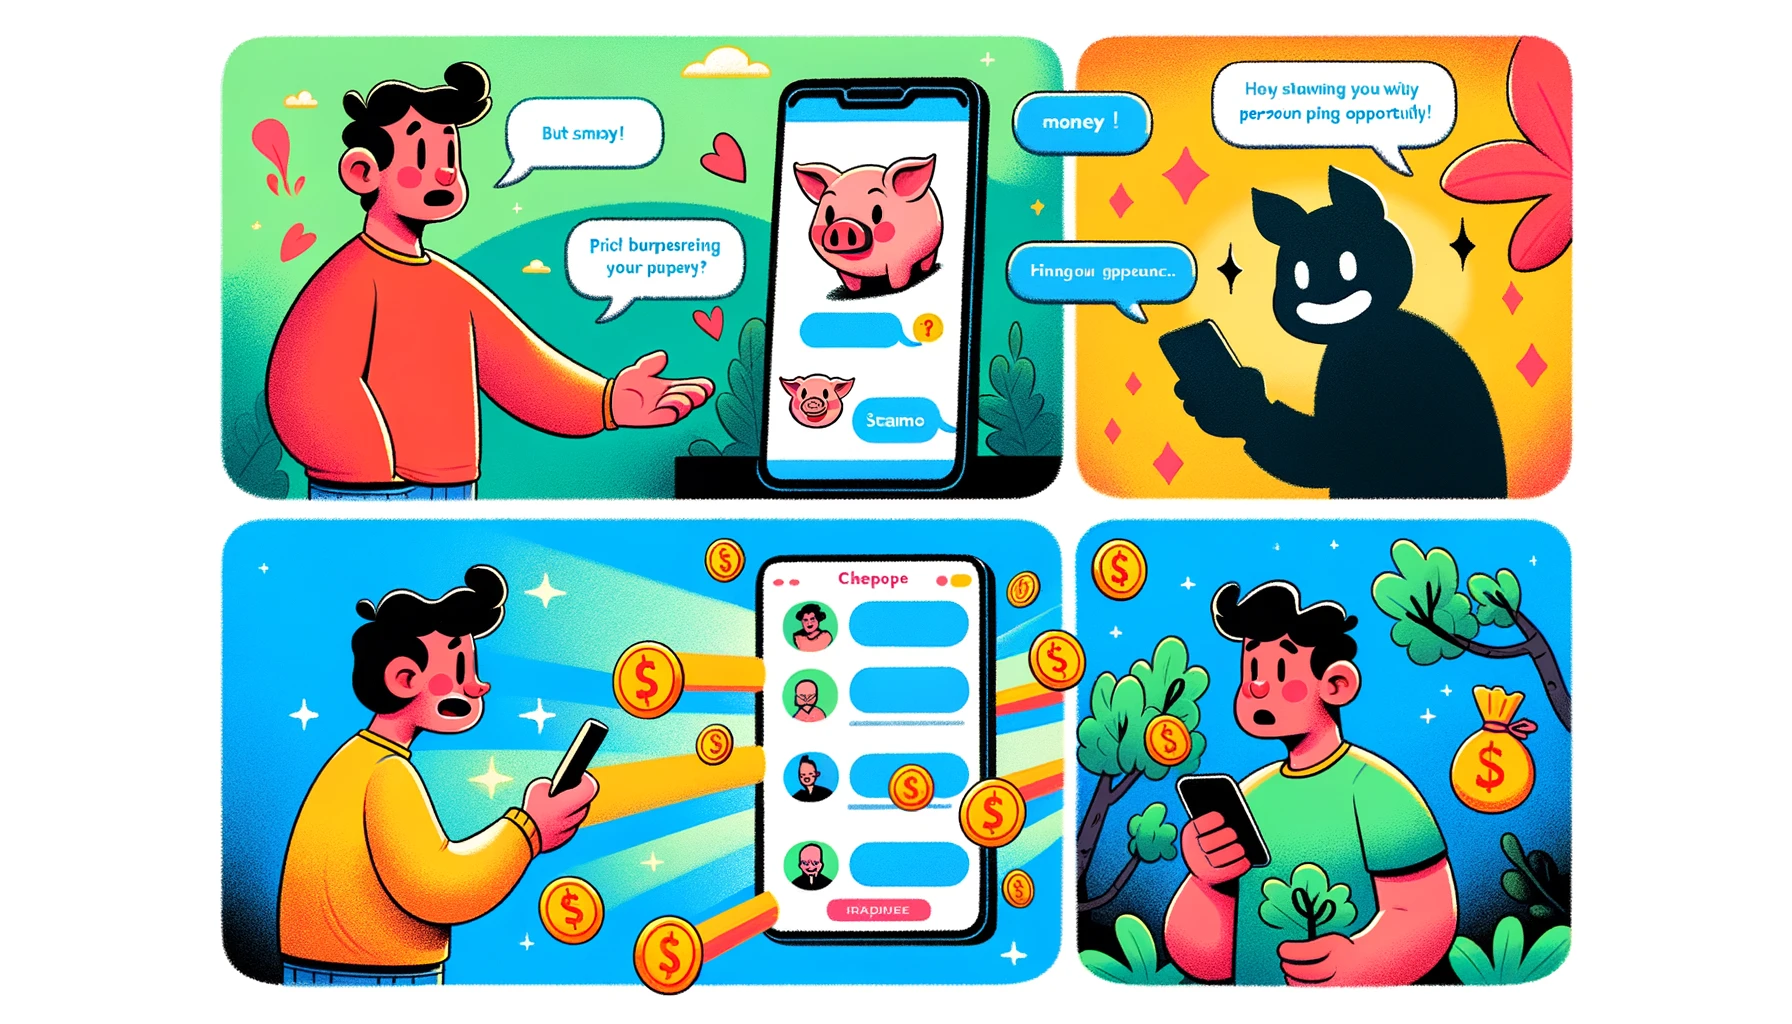 the cartoon series illustrating the stages of a pig butchering scam. Each panel captures a different phase of the scam, from the initial friendly approach to the eventual deceit and loss. This visual narrative can help raise awareness about the tactics used in such scams.